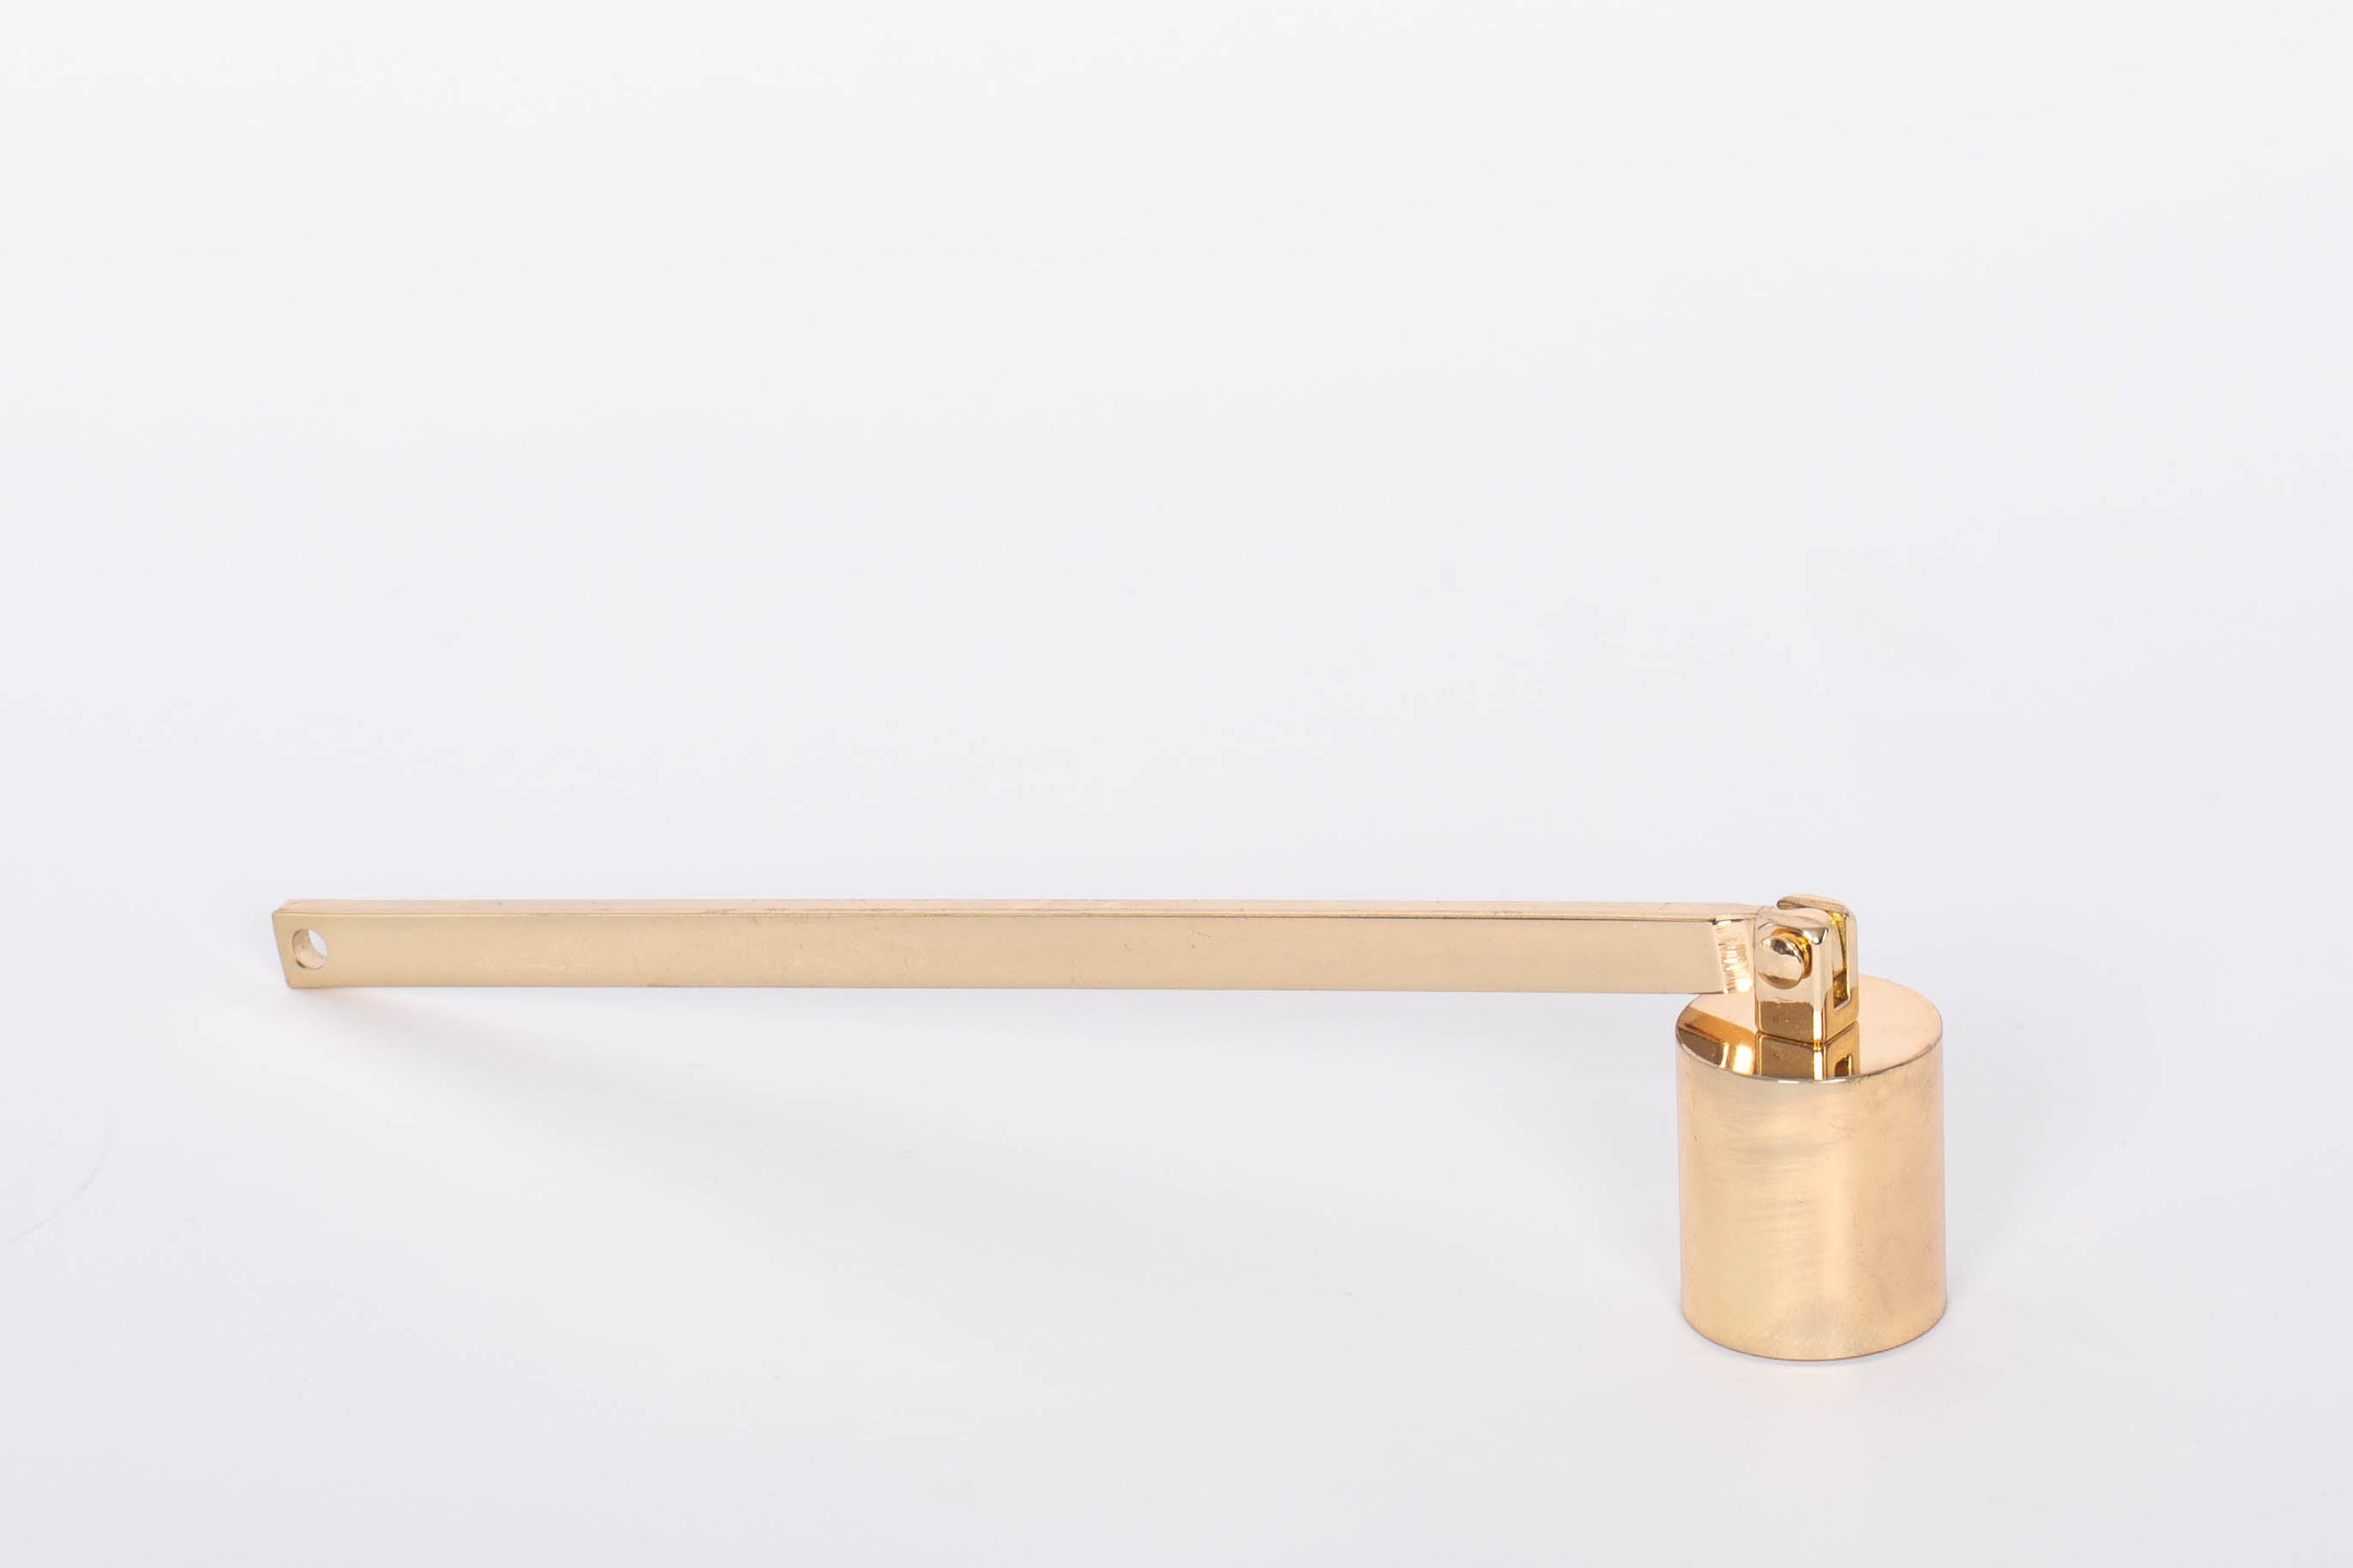 Golden Candle Snuffer by Designworks. White background.